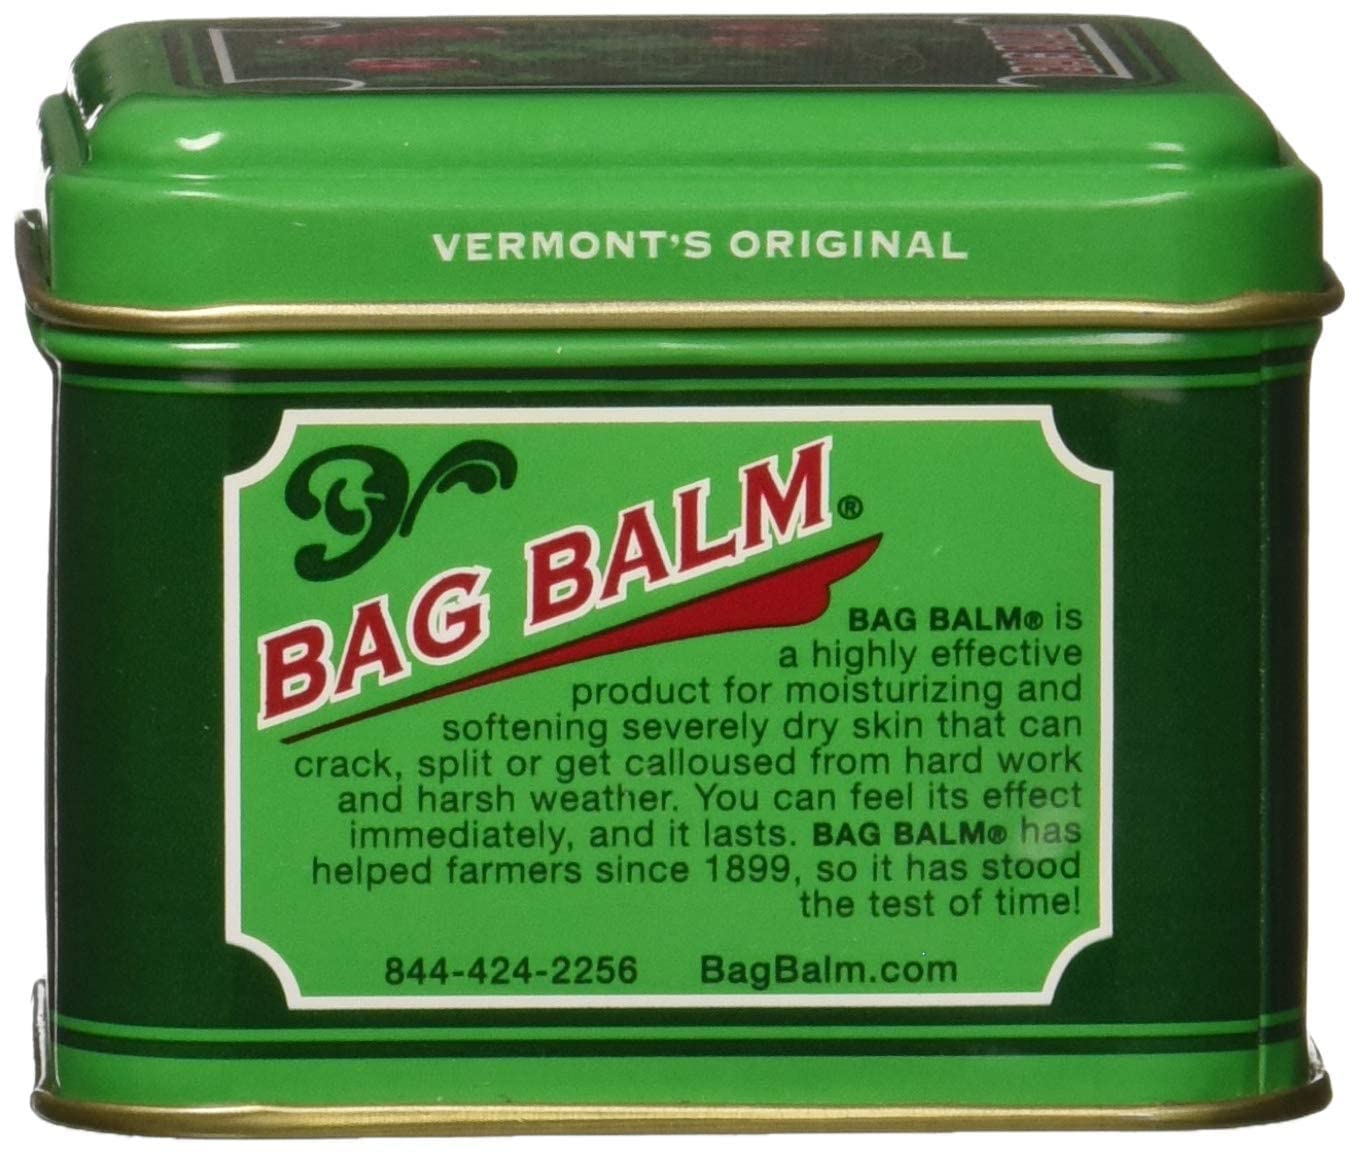 Bag Balm Vermont's Original Hand Moisturizer, Hand Balm for Dry Skin, Cracked Hands, Heels & Dry Hands Treatment, For Dogs and More Ointment, Dry Skin Lotion - 4oz Tin, 1 Pack